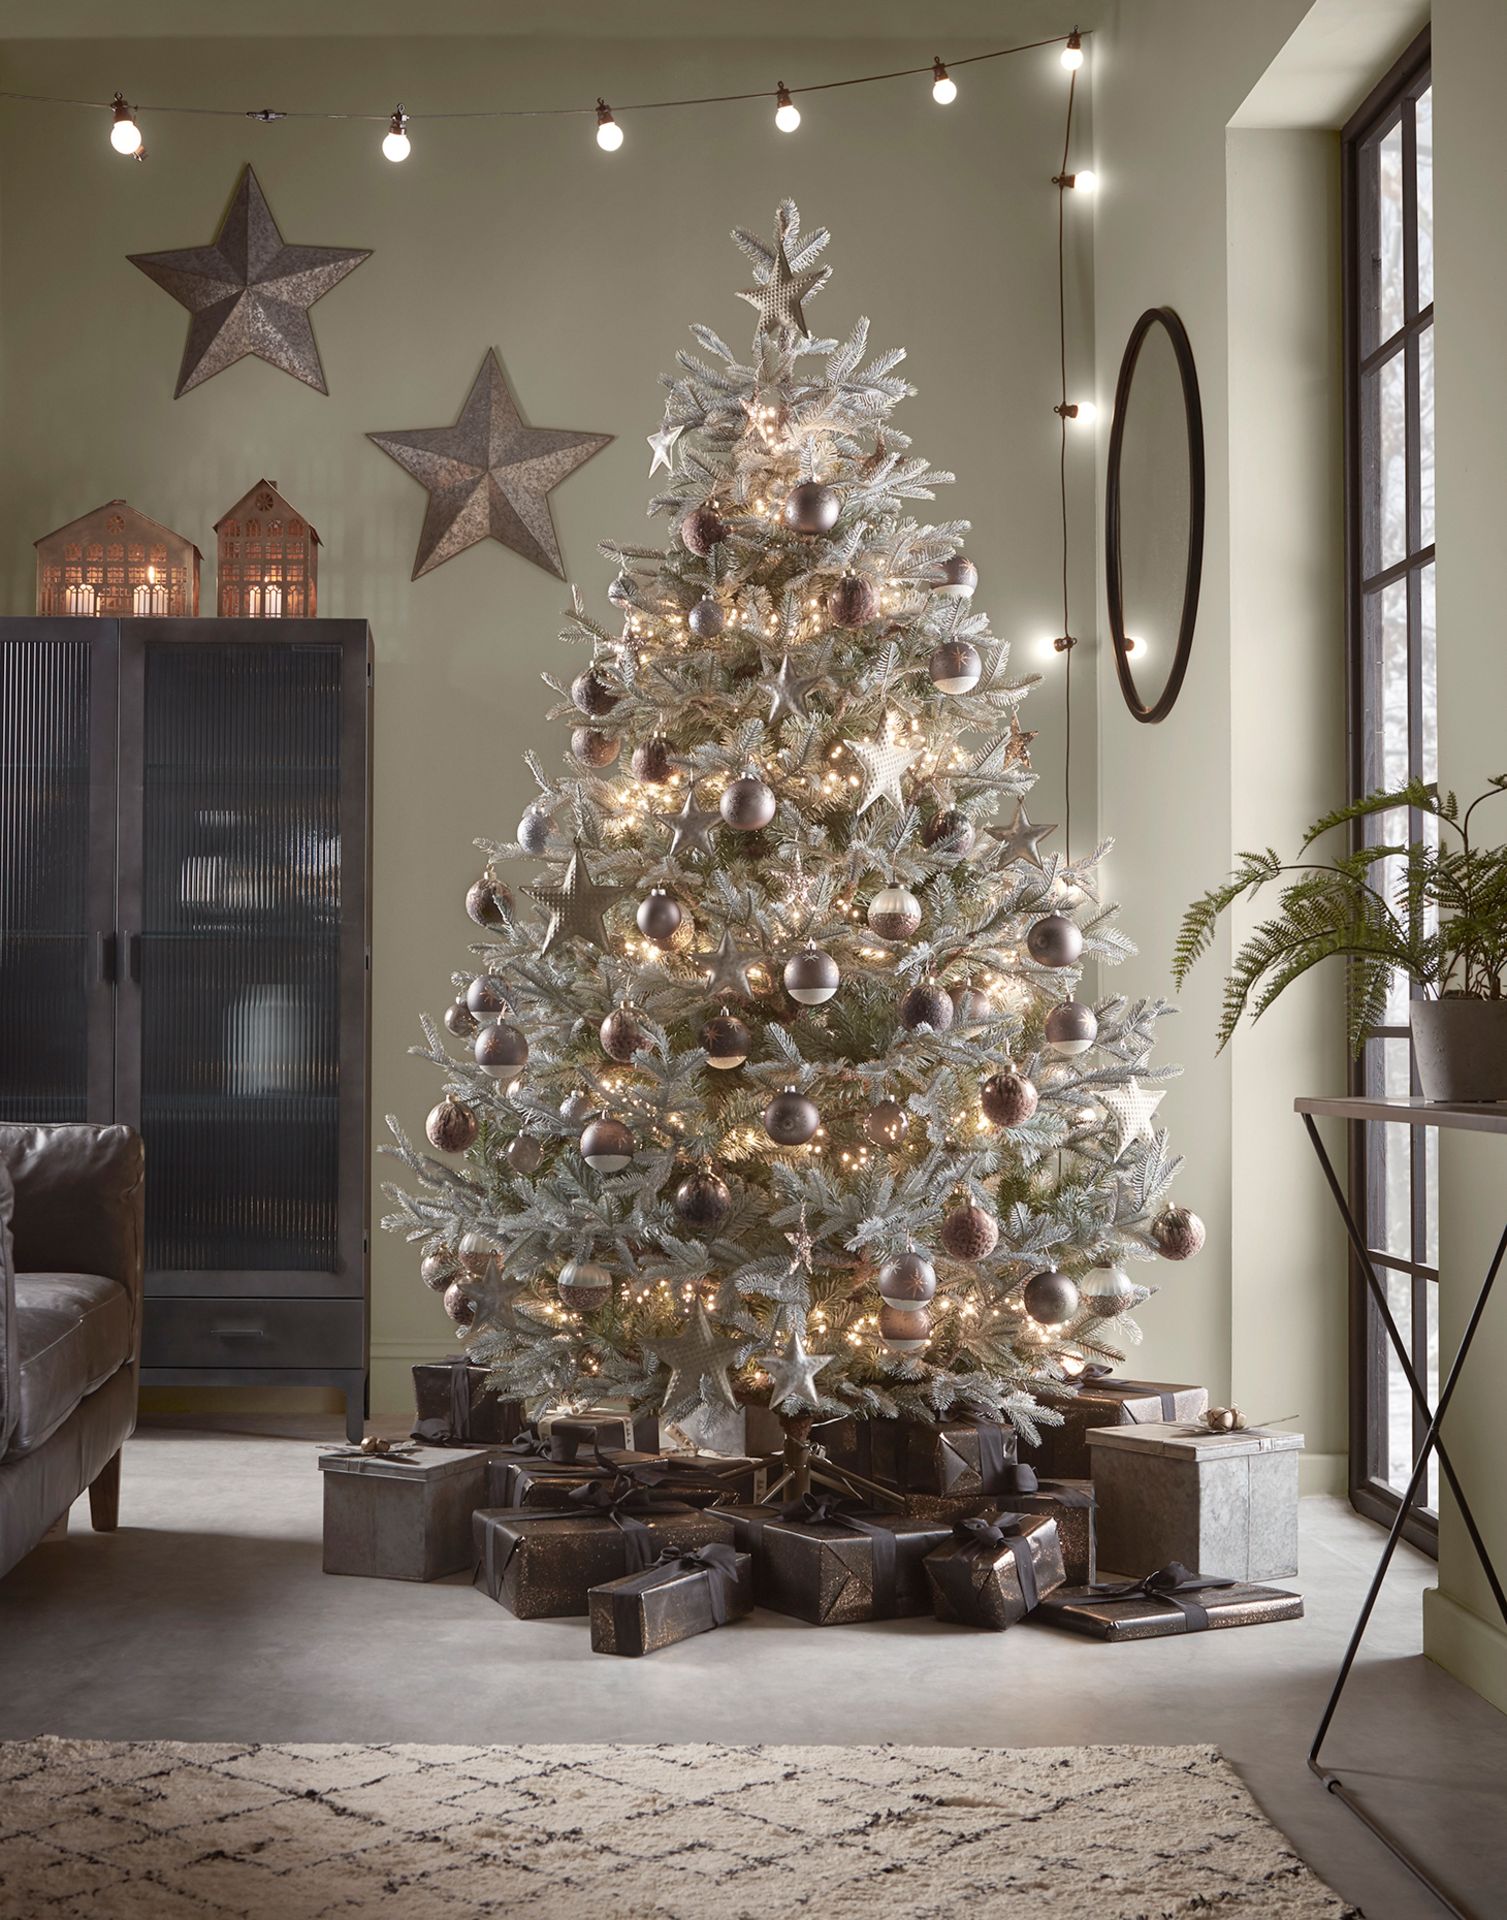 Cox & Cox 7ft Pre-Lit Blue Mountain Spruce Christmas Tree. RRP £475.00. The perfect centrepiece